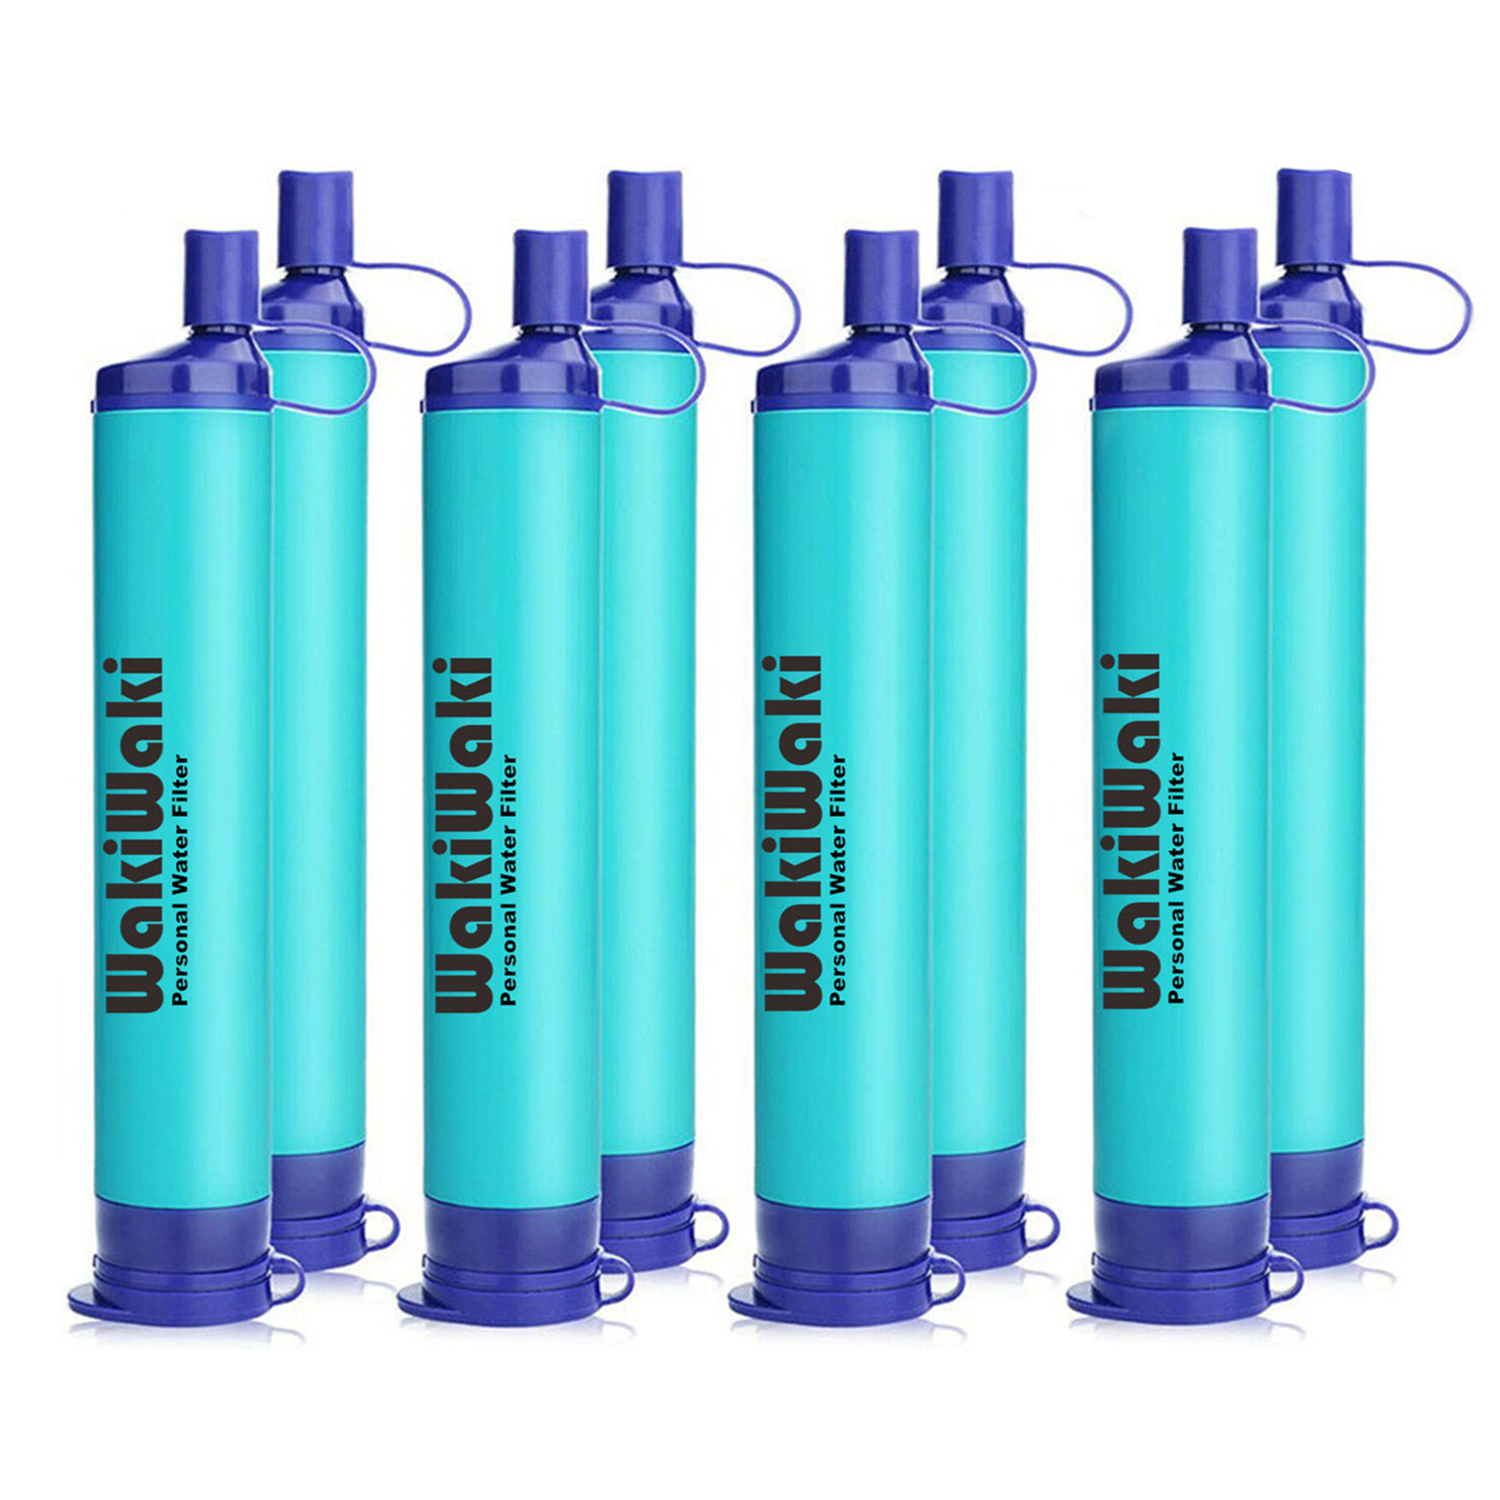 Personal Survival Water Filter Straw Purifier Filtration Camping Hking Emergency 